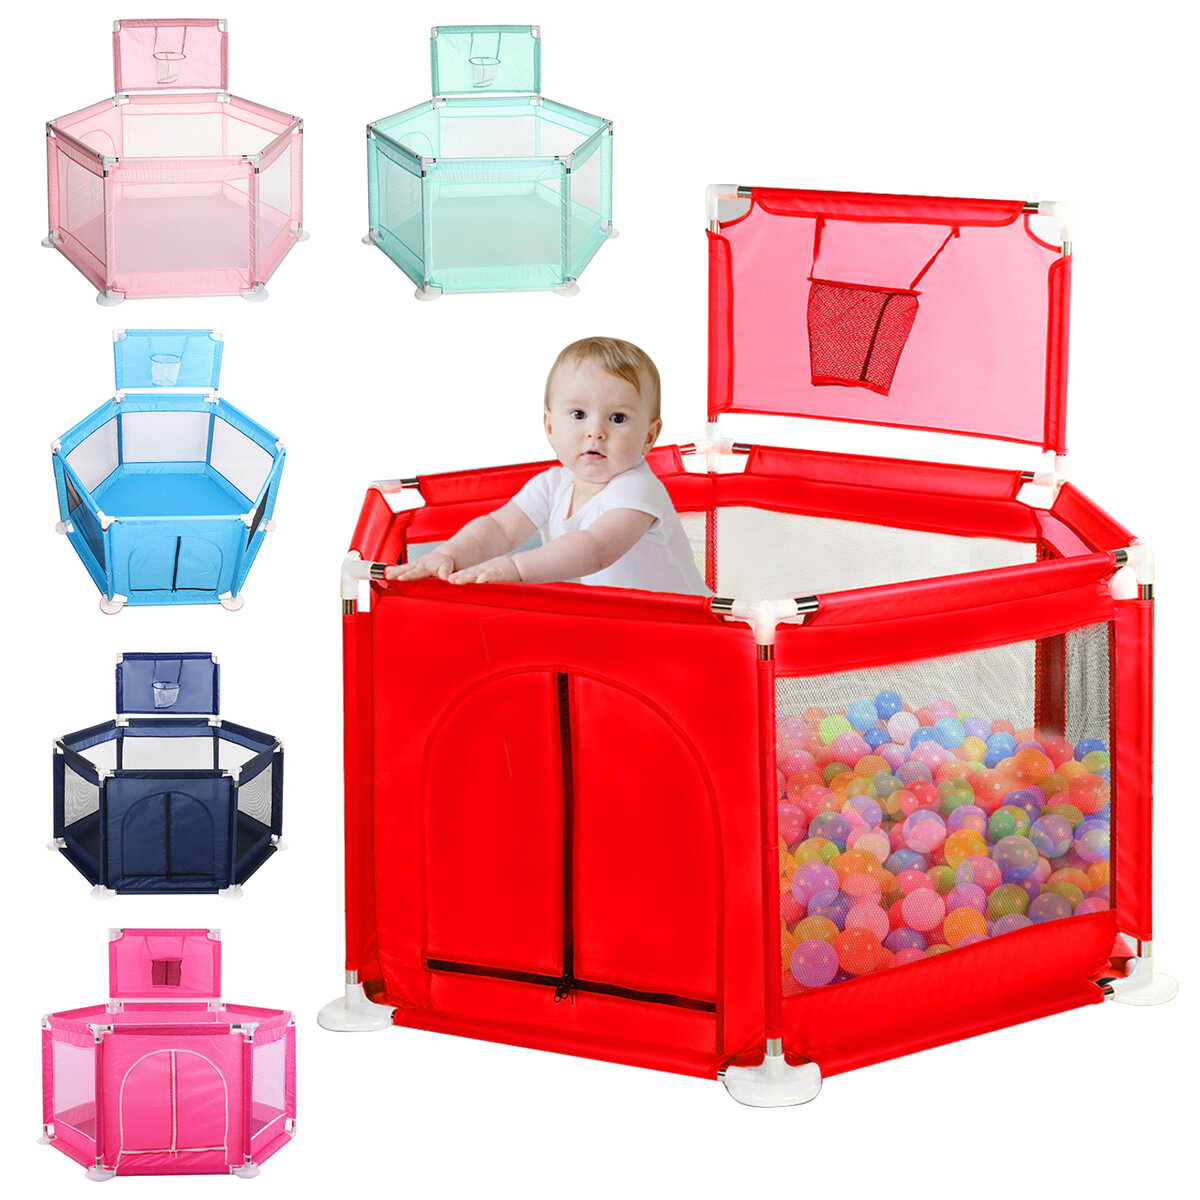 Playpen For Children Infant Fence Safety Barriers Children's Ball Pool Baby Playground Gym with Basketball Field